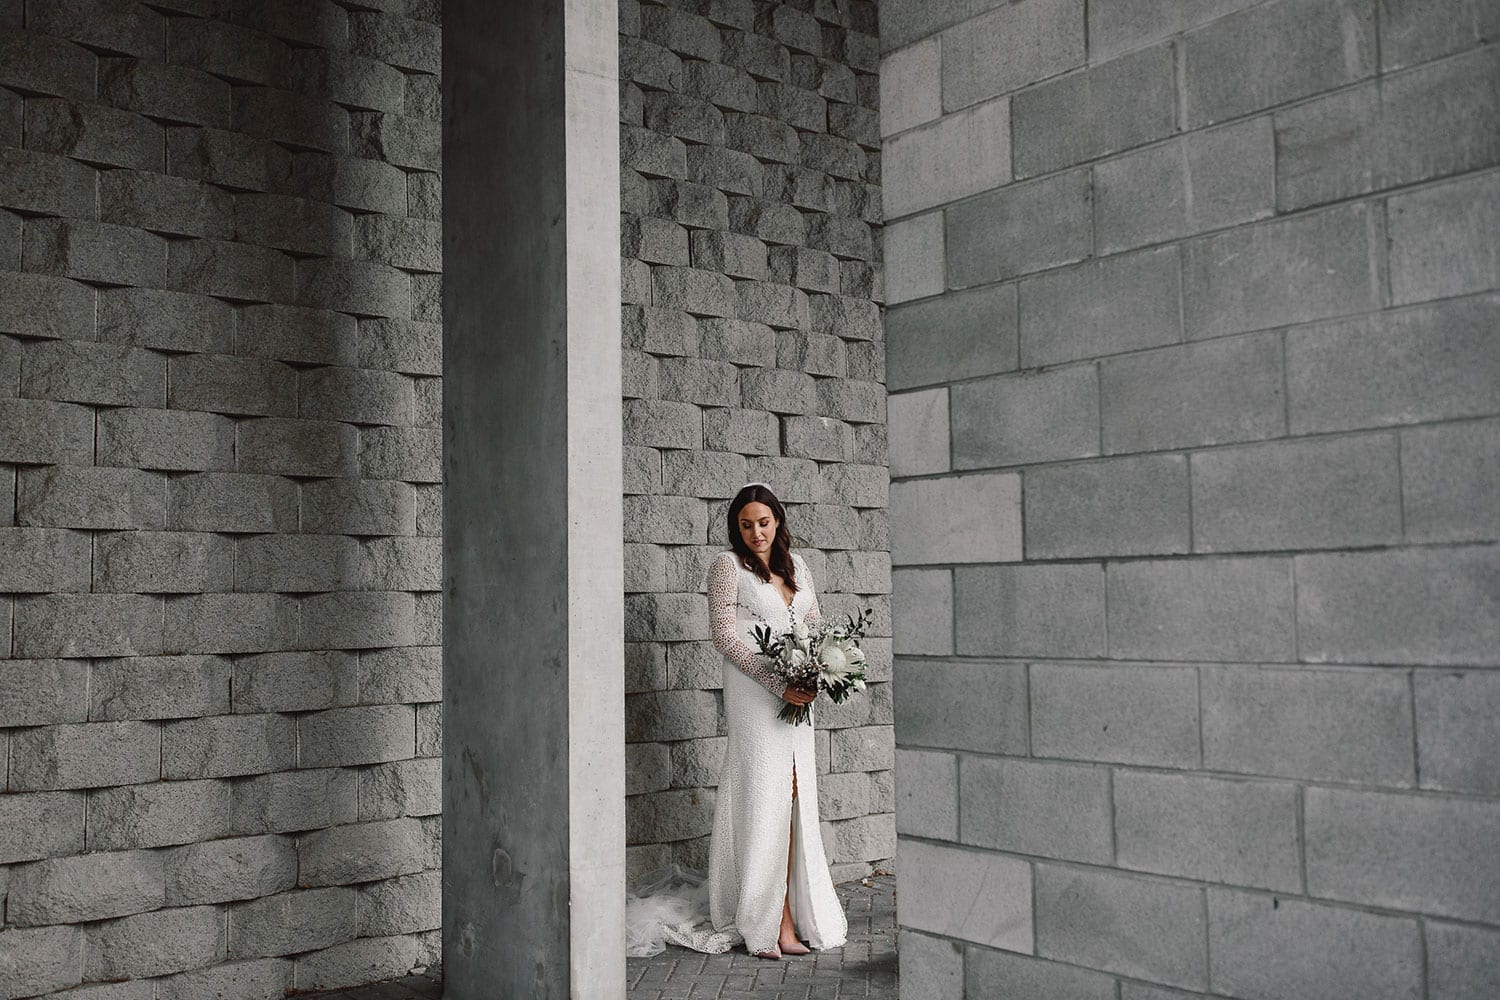 Vinka Design Features Real Weddings - bride in custom made gown fitted with a deep V neckline, front split and long lace sleeves. In big grey brick building